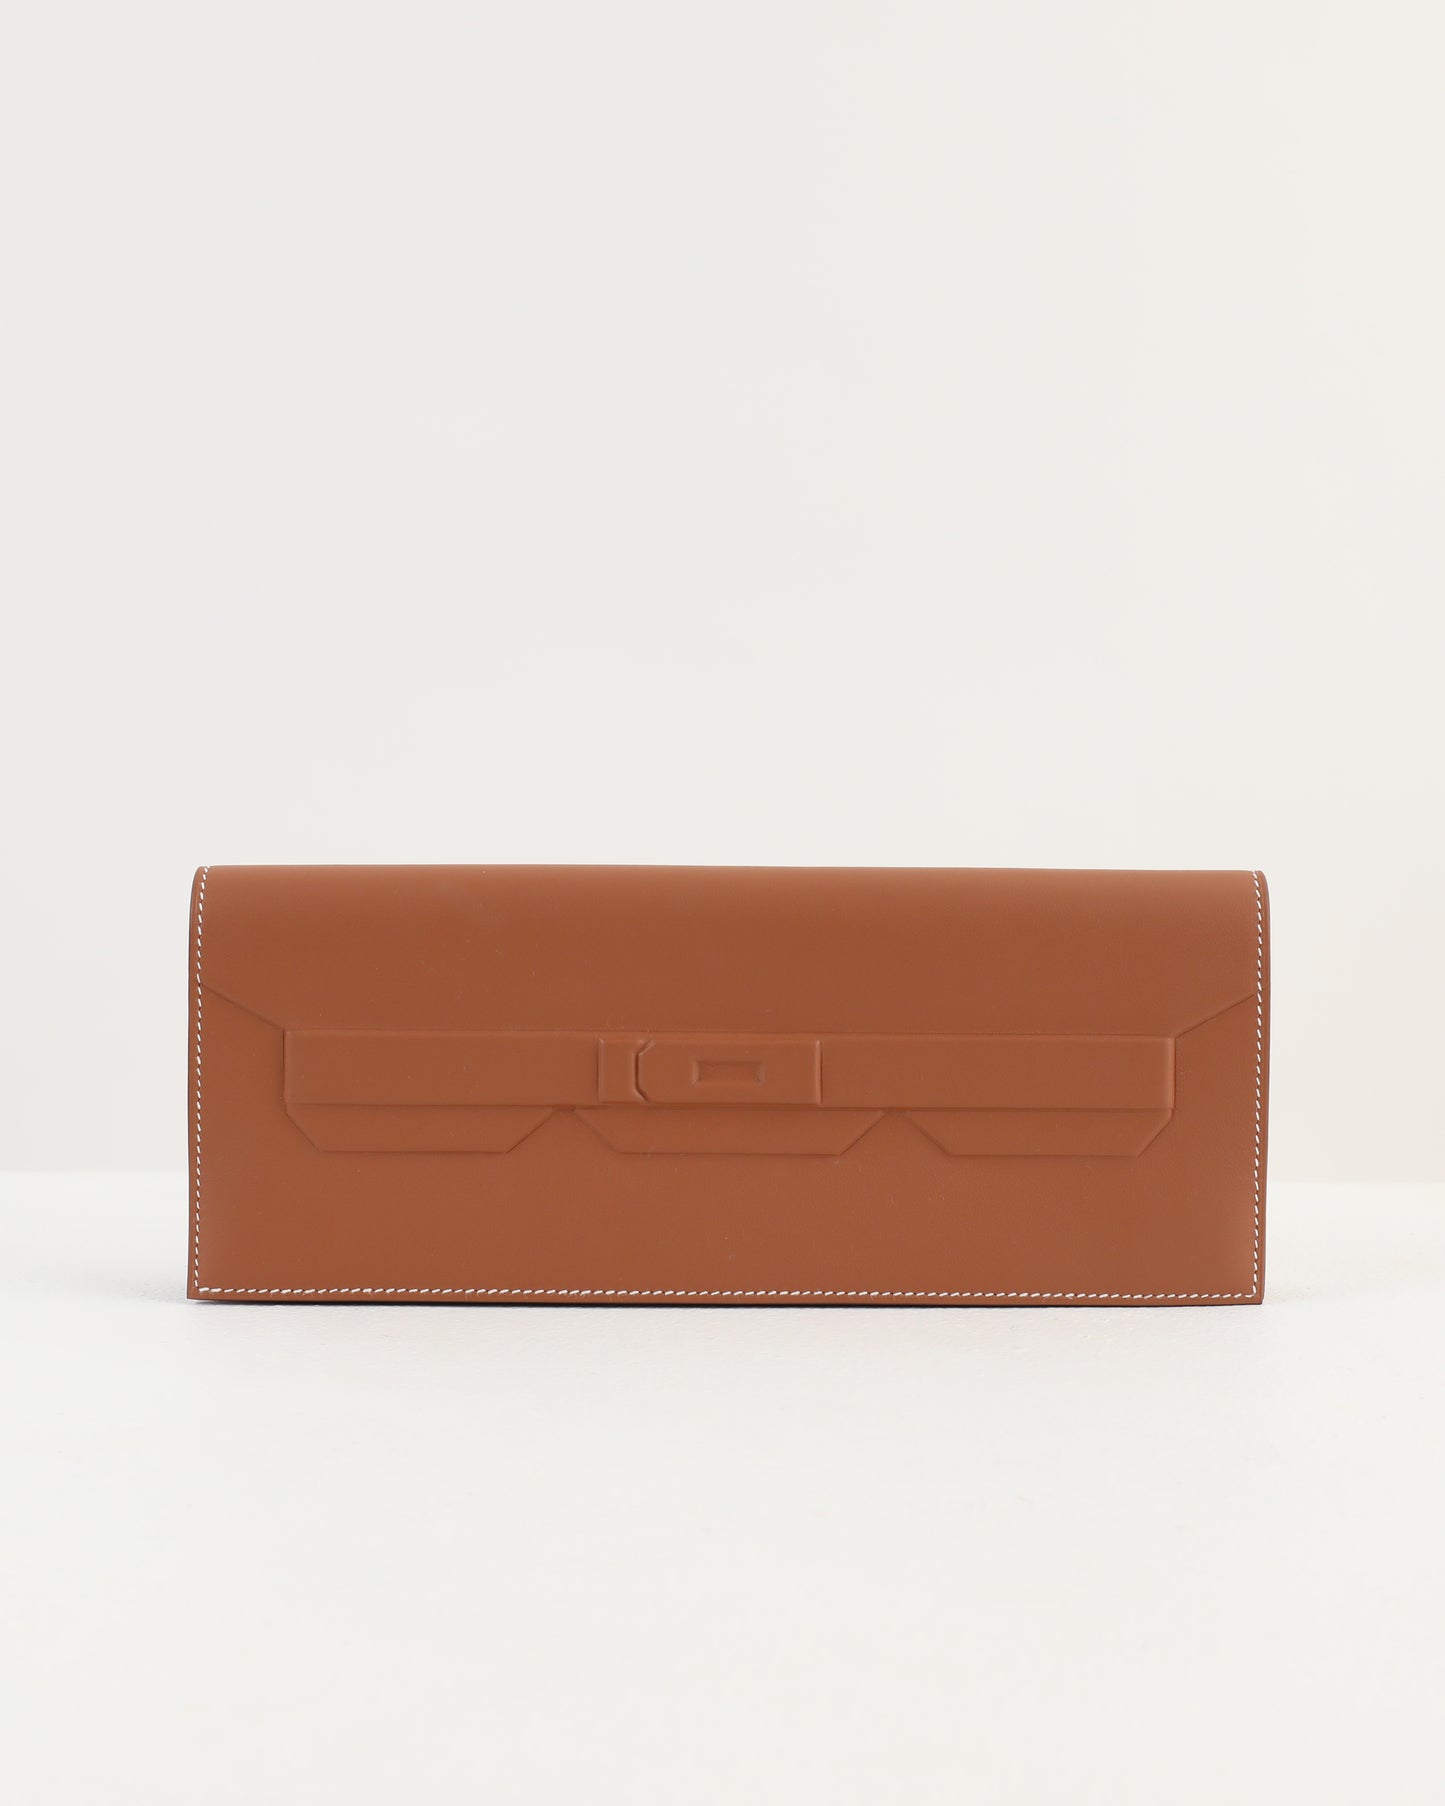 HERMES Shadow Kelly Clutch Swift Leather Gold